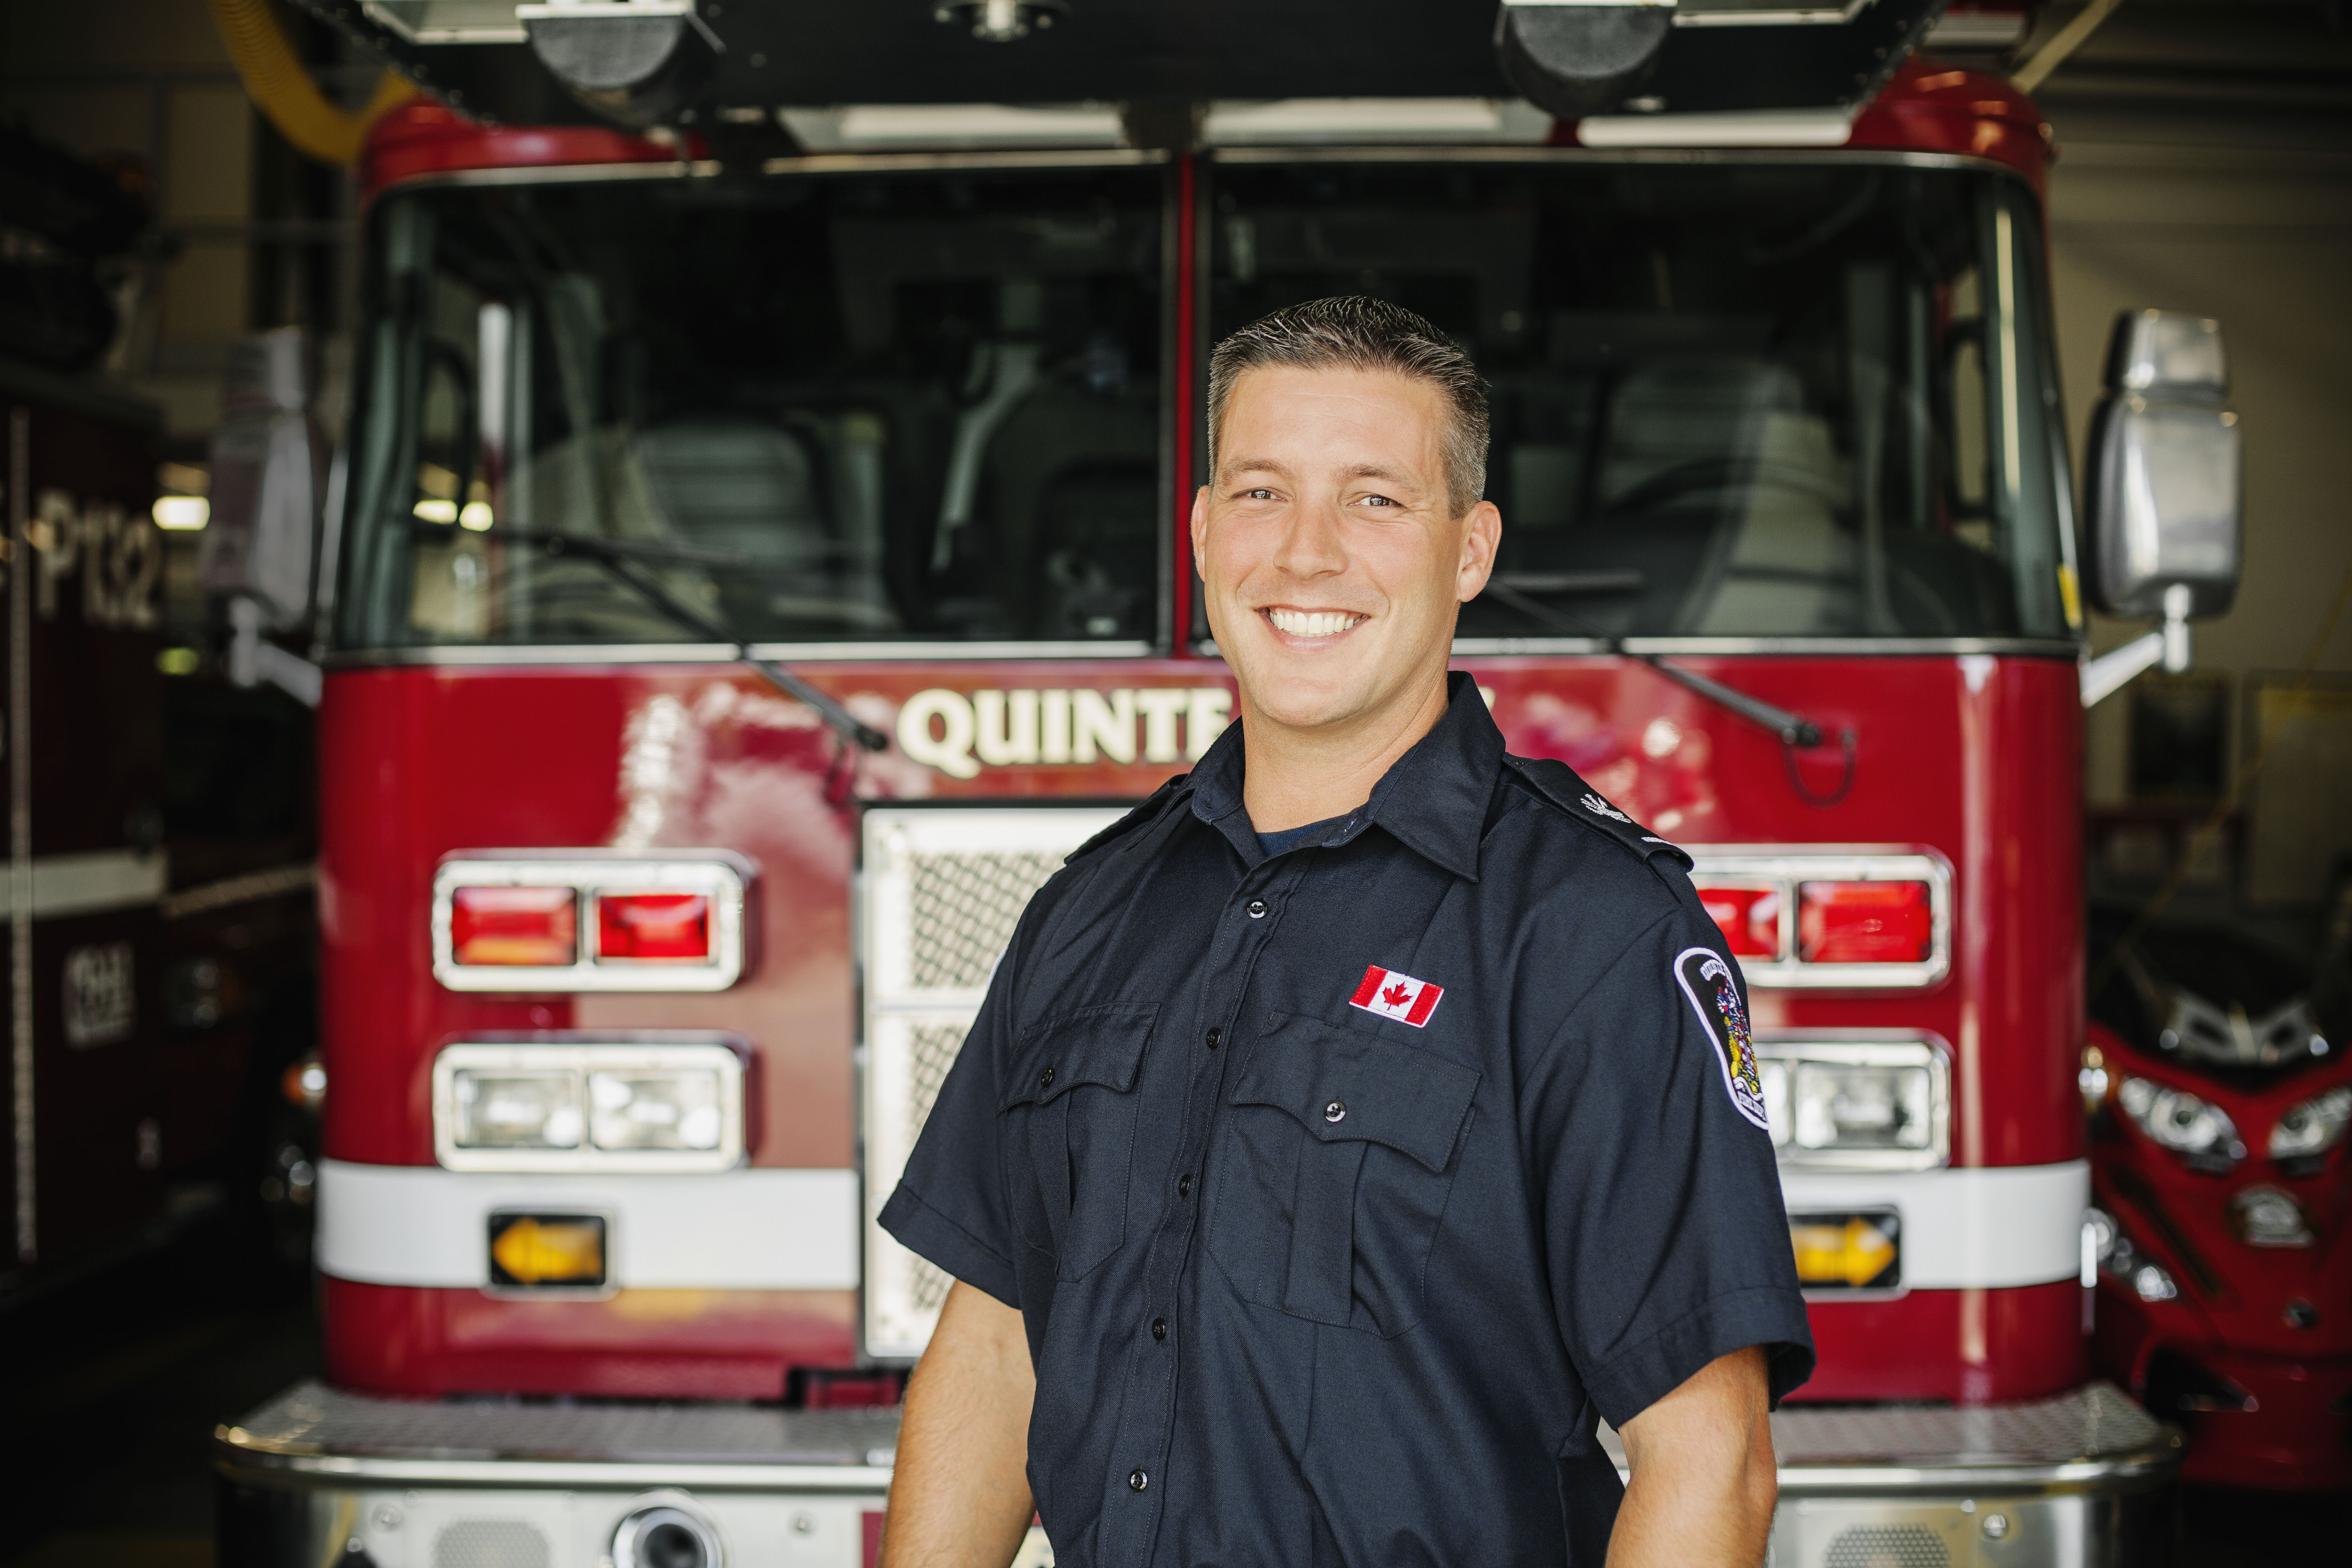 Off duty Fire fighter smiling in front of fire truck